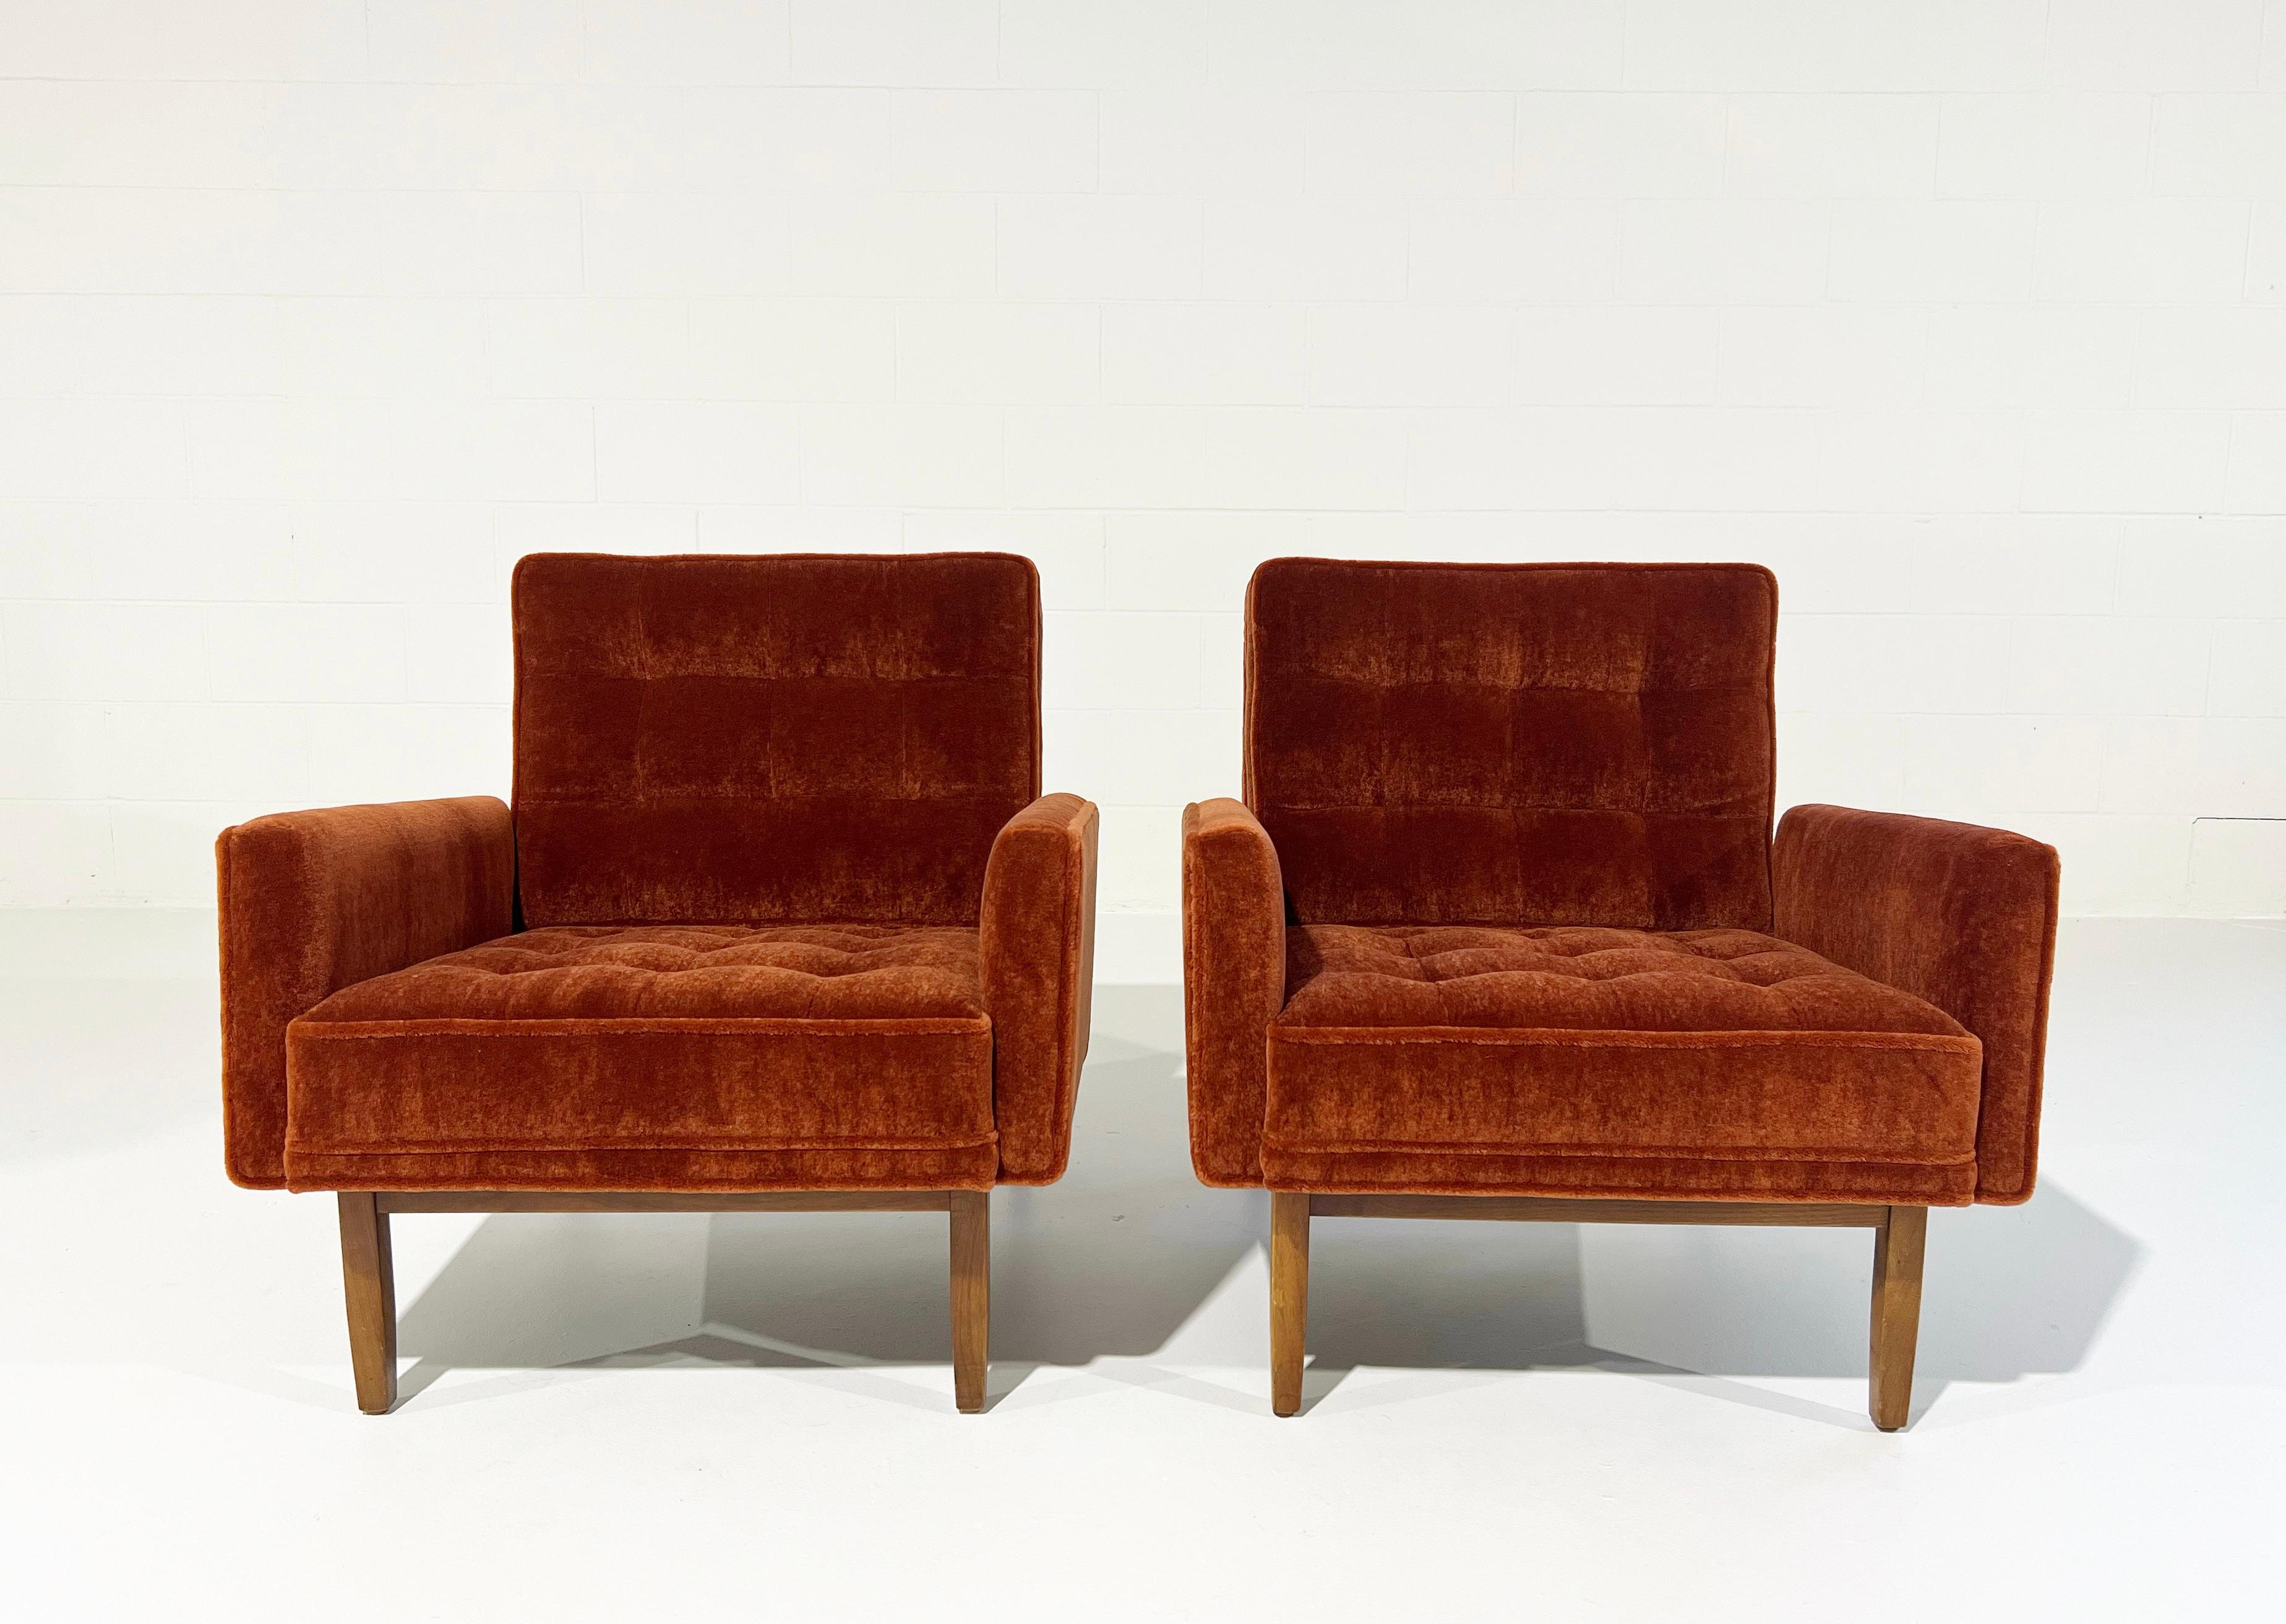 American Florence Knoll Armchairs in Pierre Frey Teddy Mohair For Sale